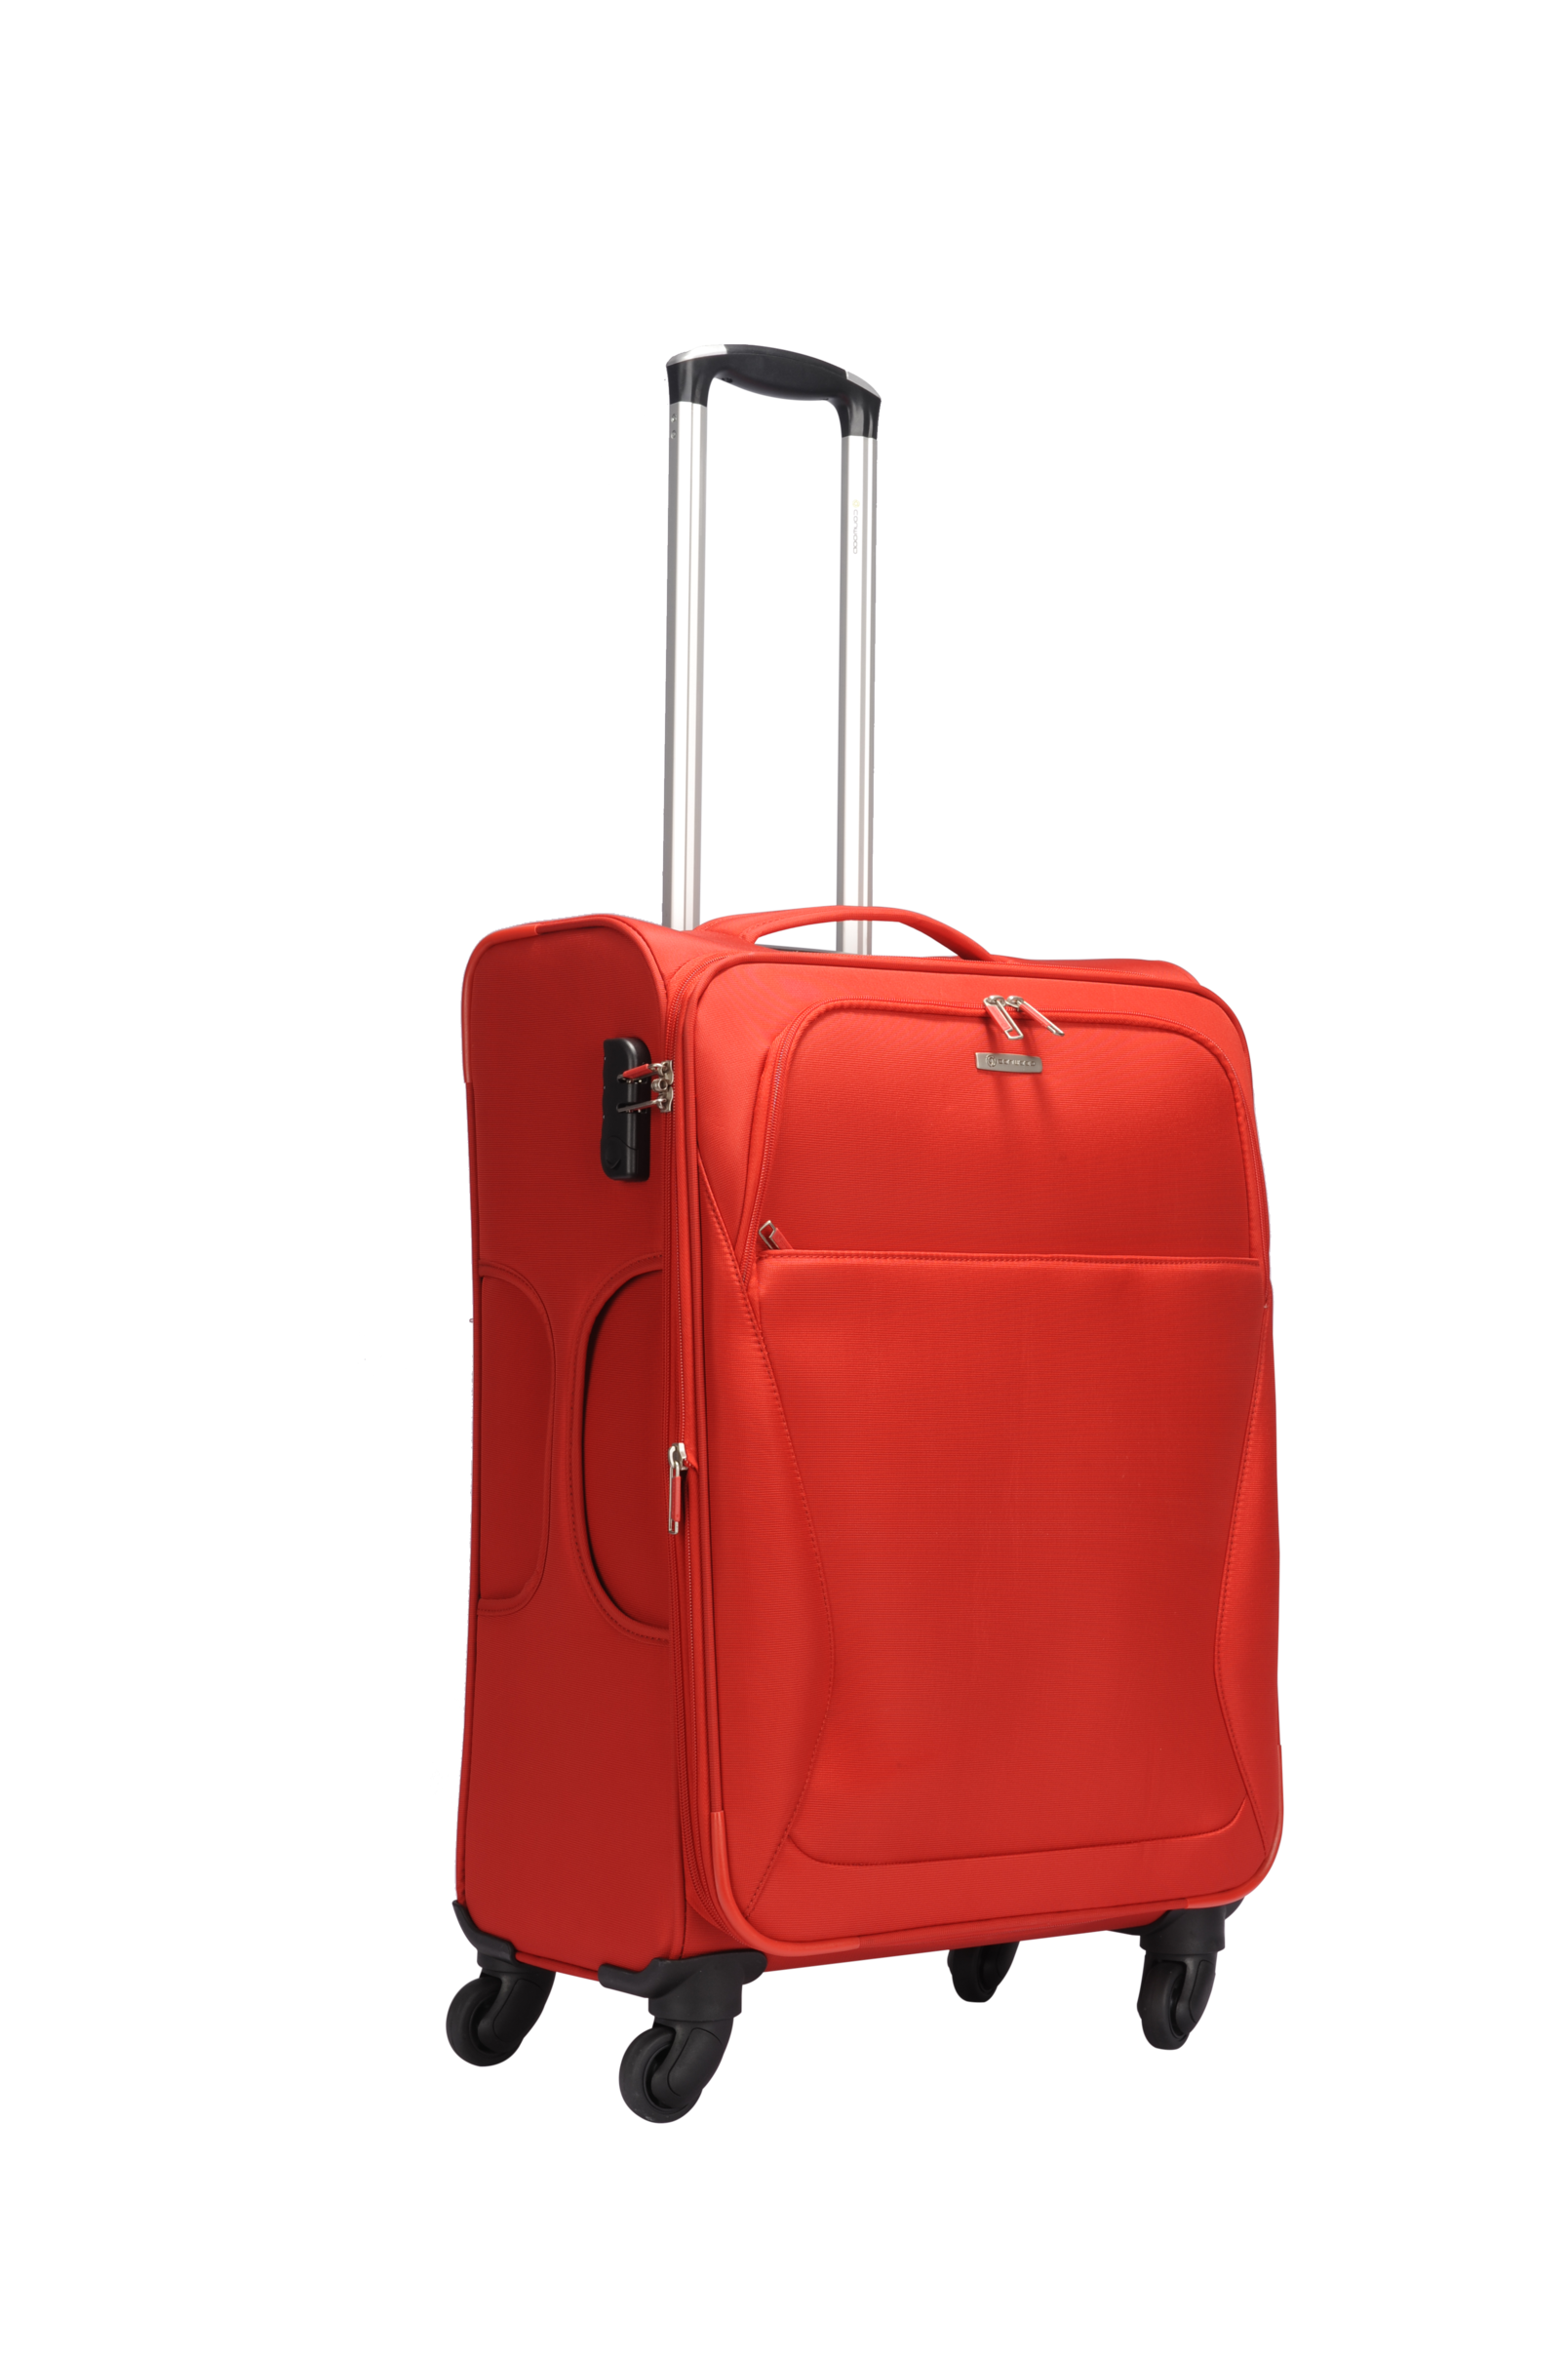 Red Luggage Suitcase PNG HD File pngteam.com